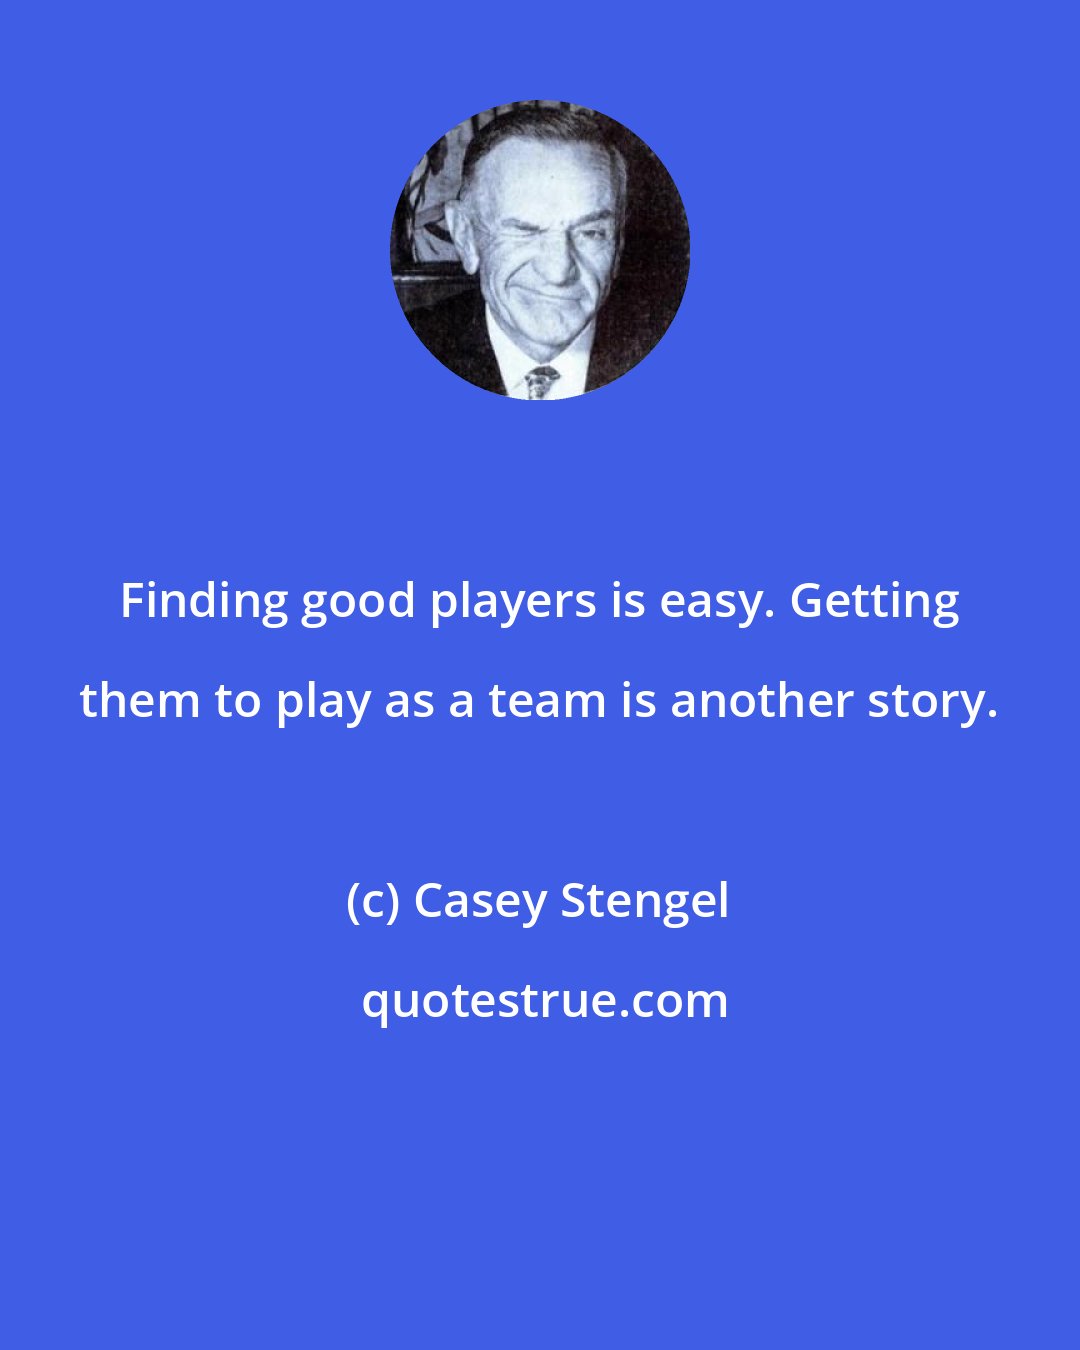 Casey Stengel: Finding good players is easy. Getting them to play as a team is another story.